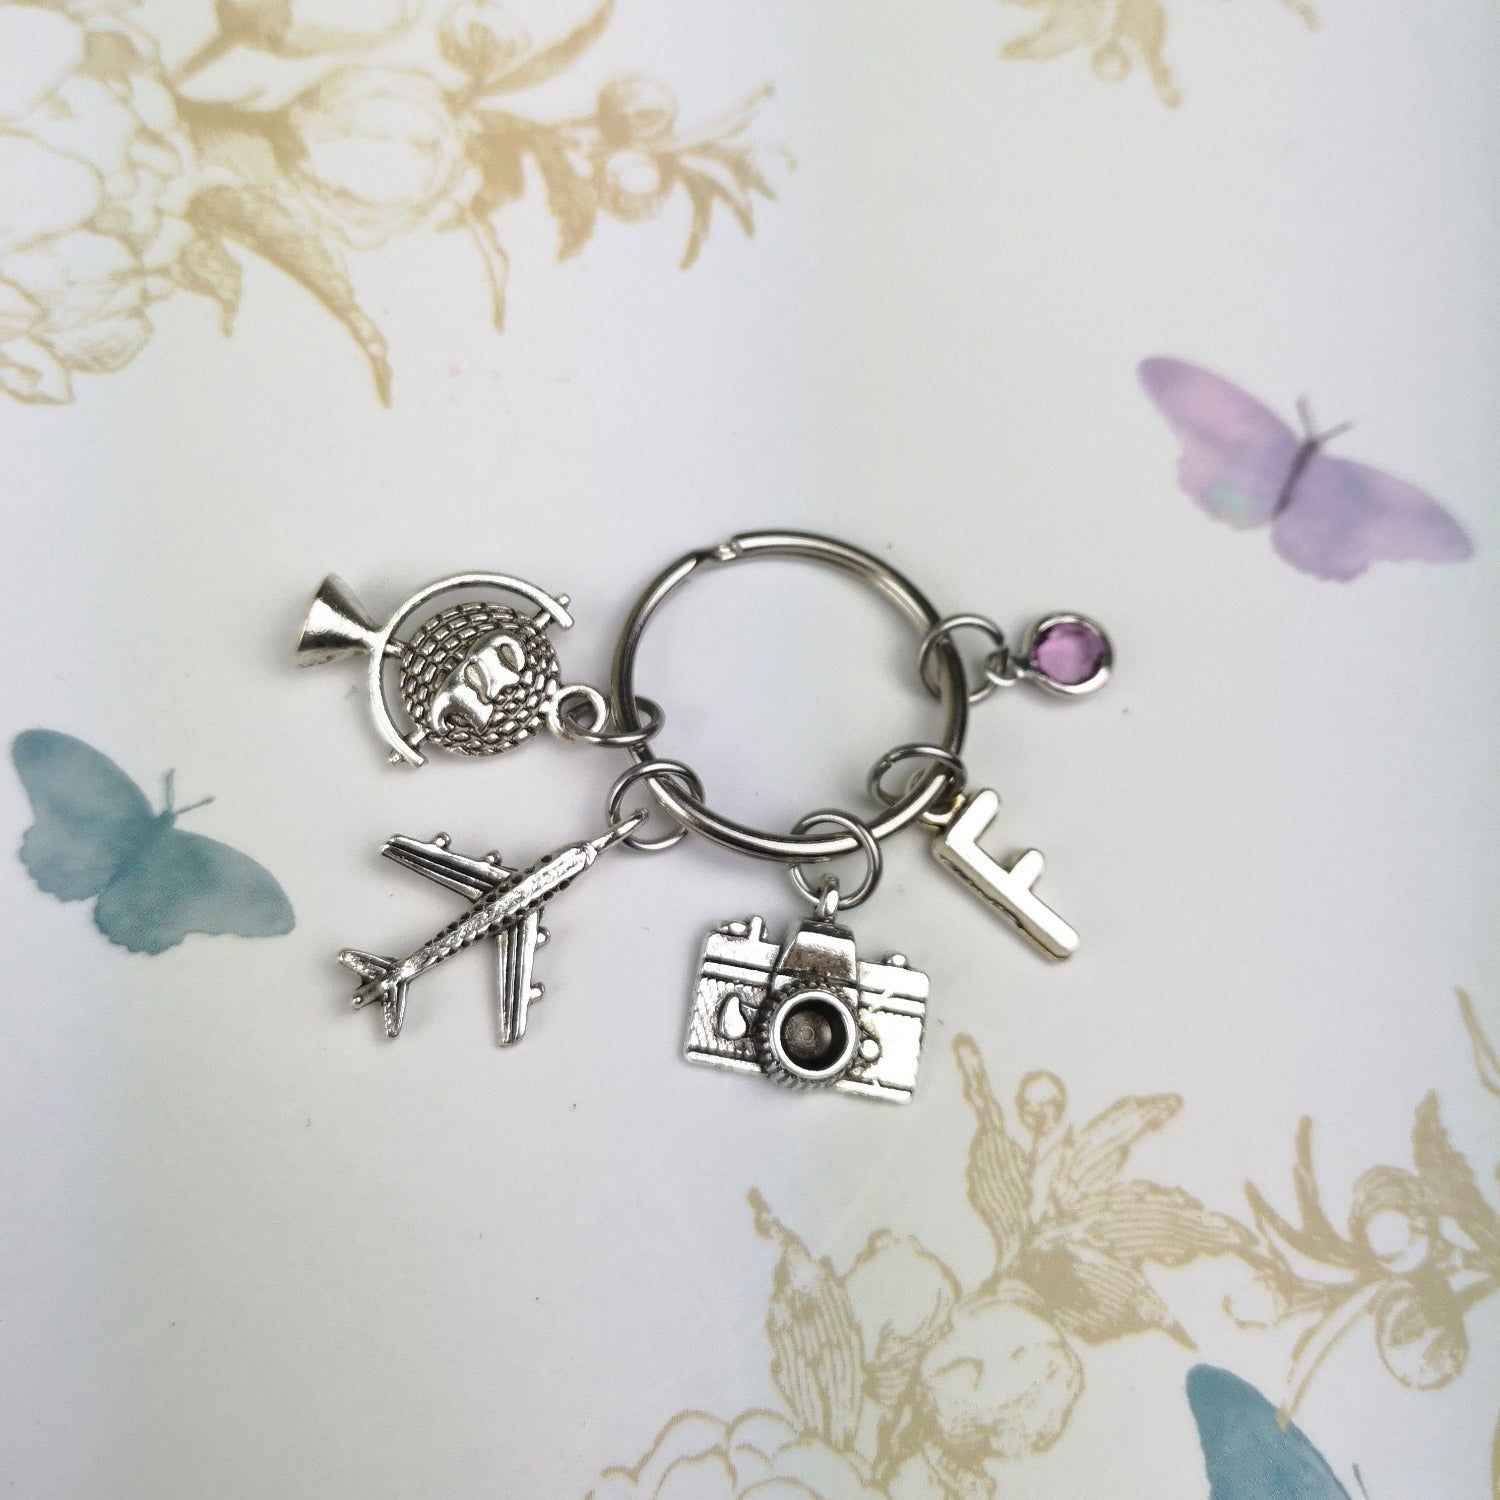 personalised keyring with camera, globe and plane charms